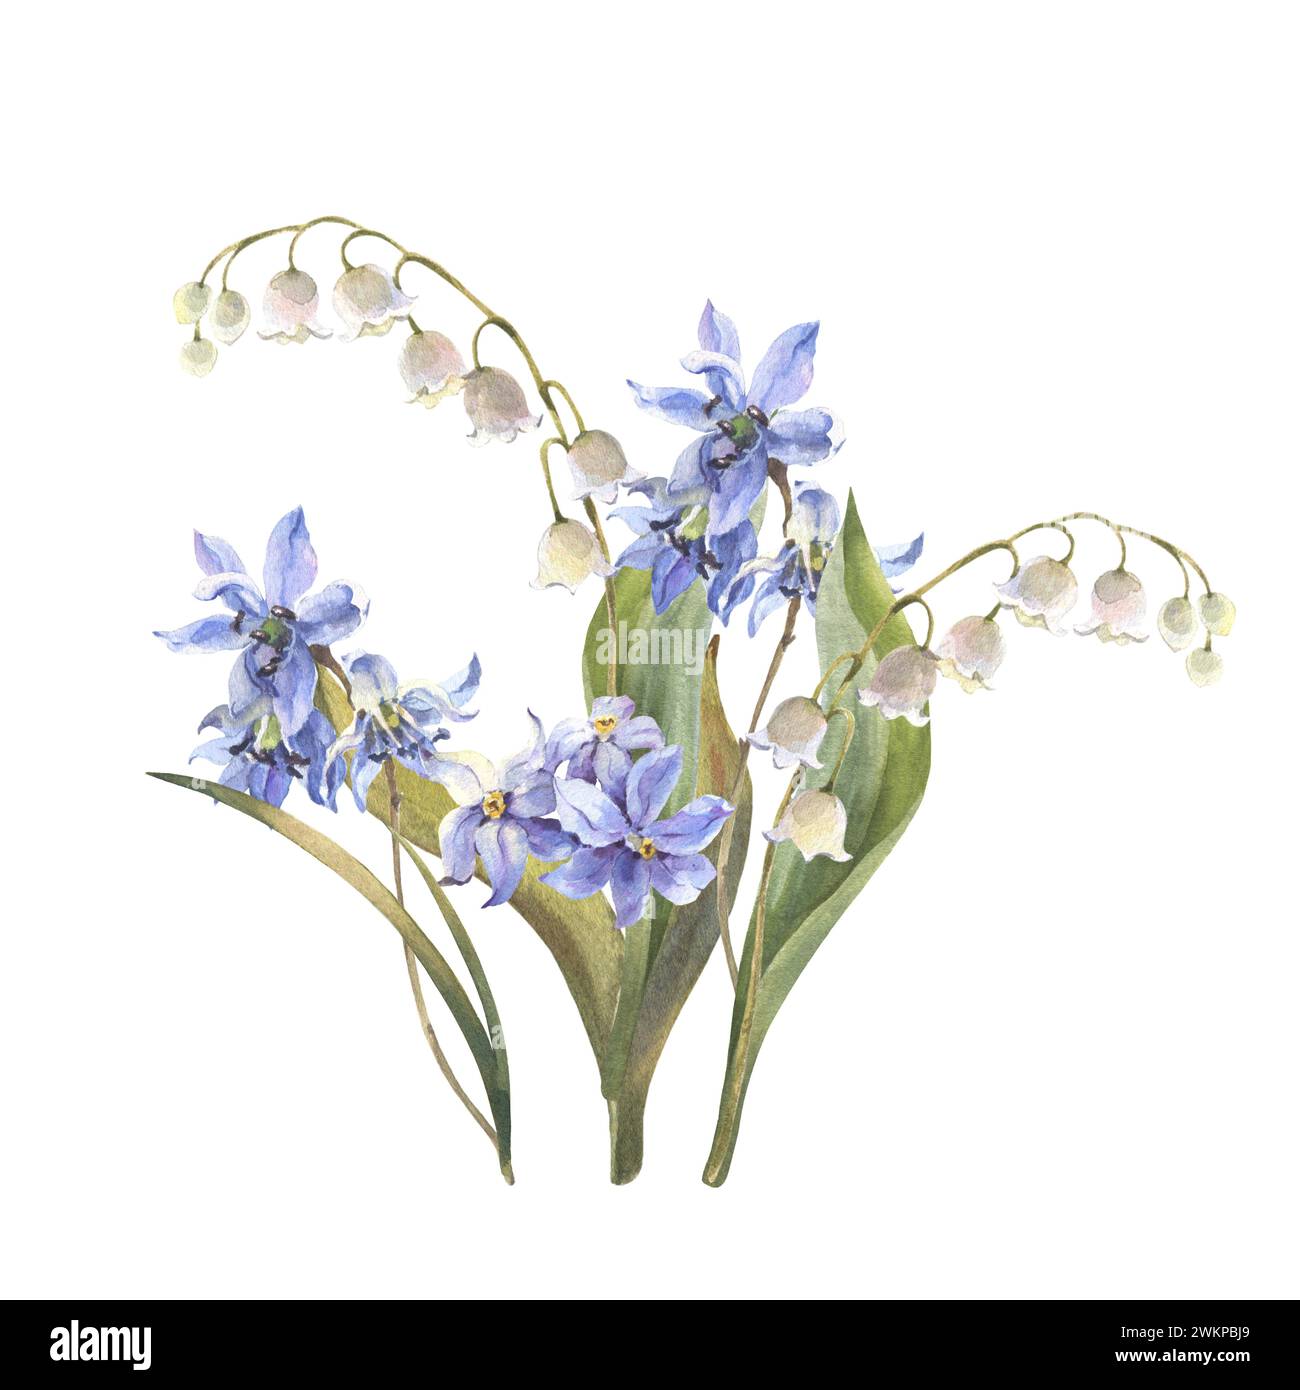 Watercolor Spring flowers bouquet. Blue Scilla flowers, lily isolated on white background. Forest flowers liverwort, scilla, coppice. Illustration of Stock Photo